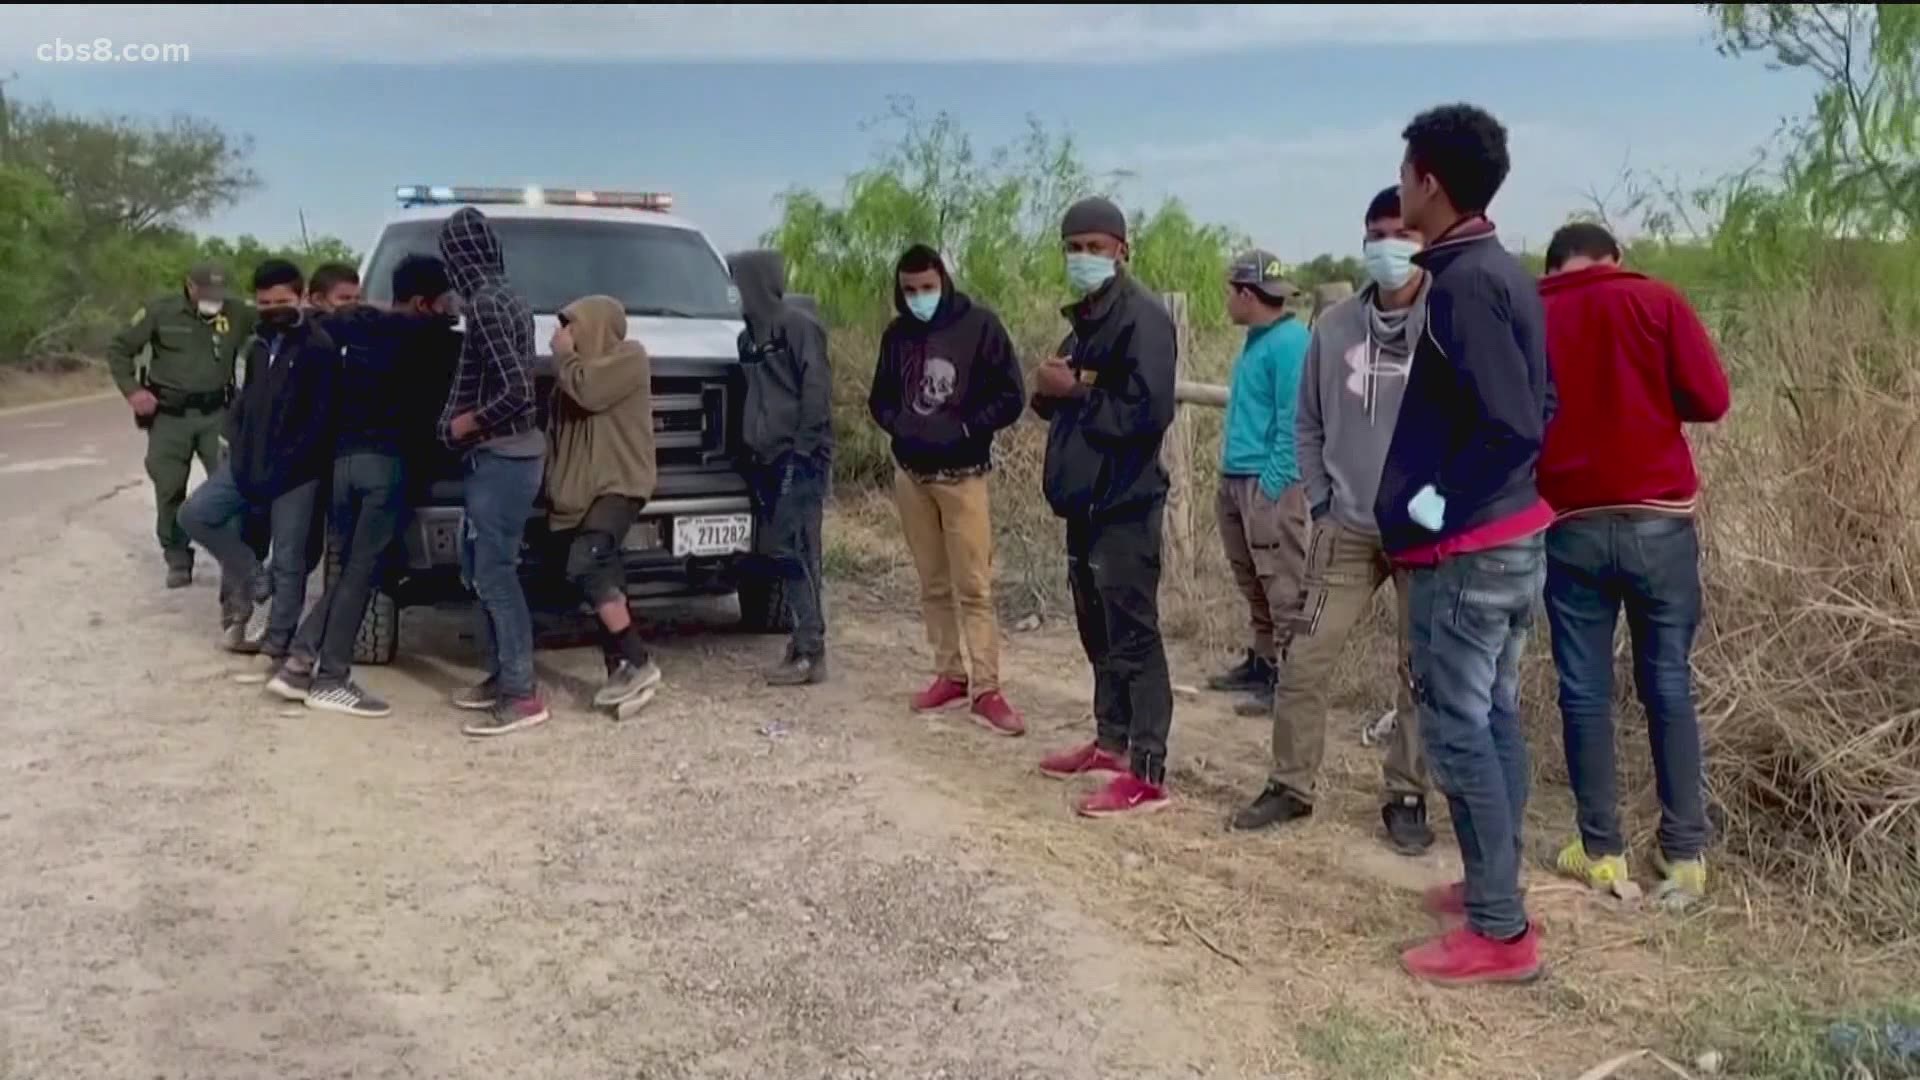 The Dept. of Homeland Security says the number of illegal border crossings is on pace to hit a 20 year peak.